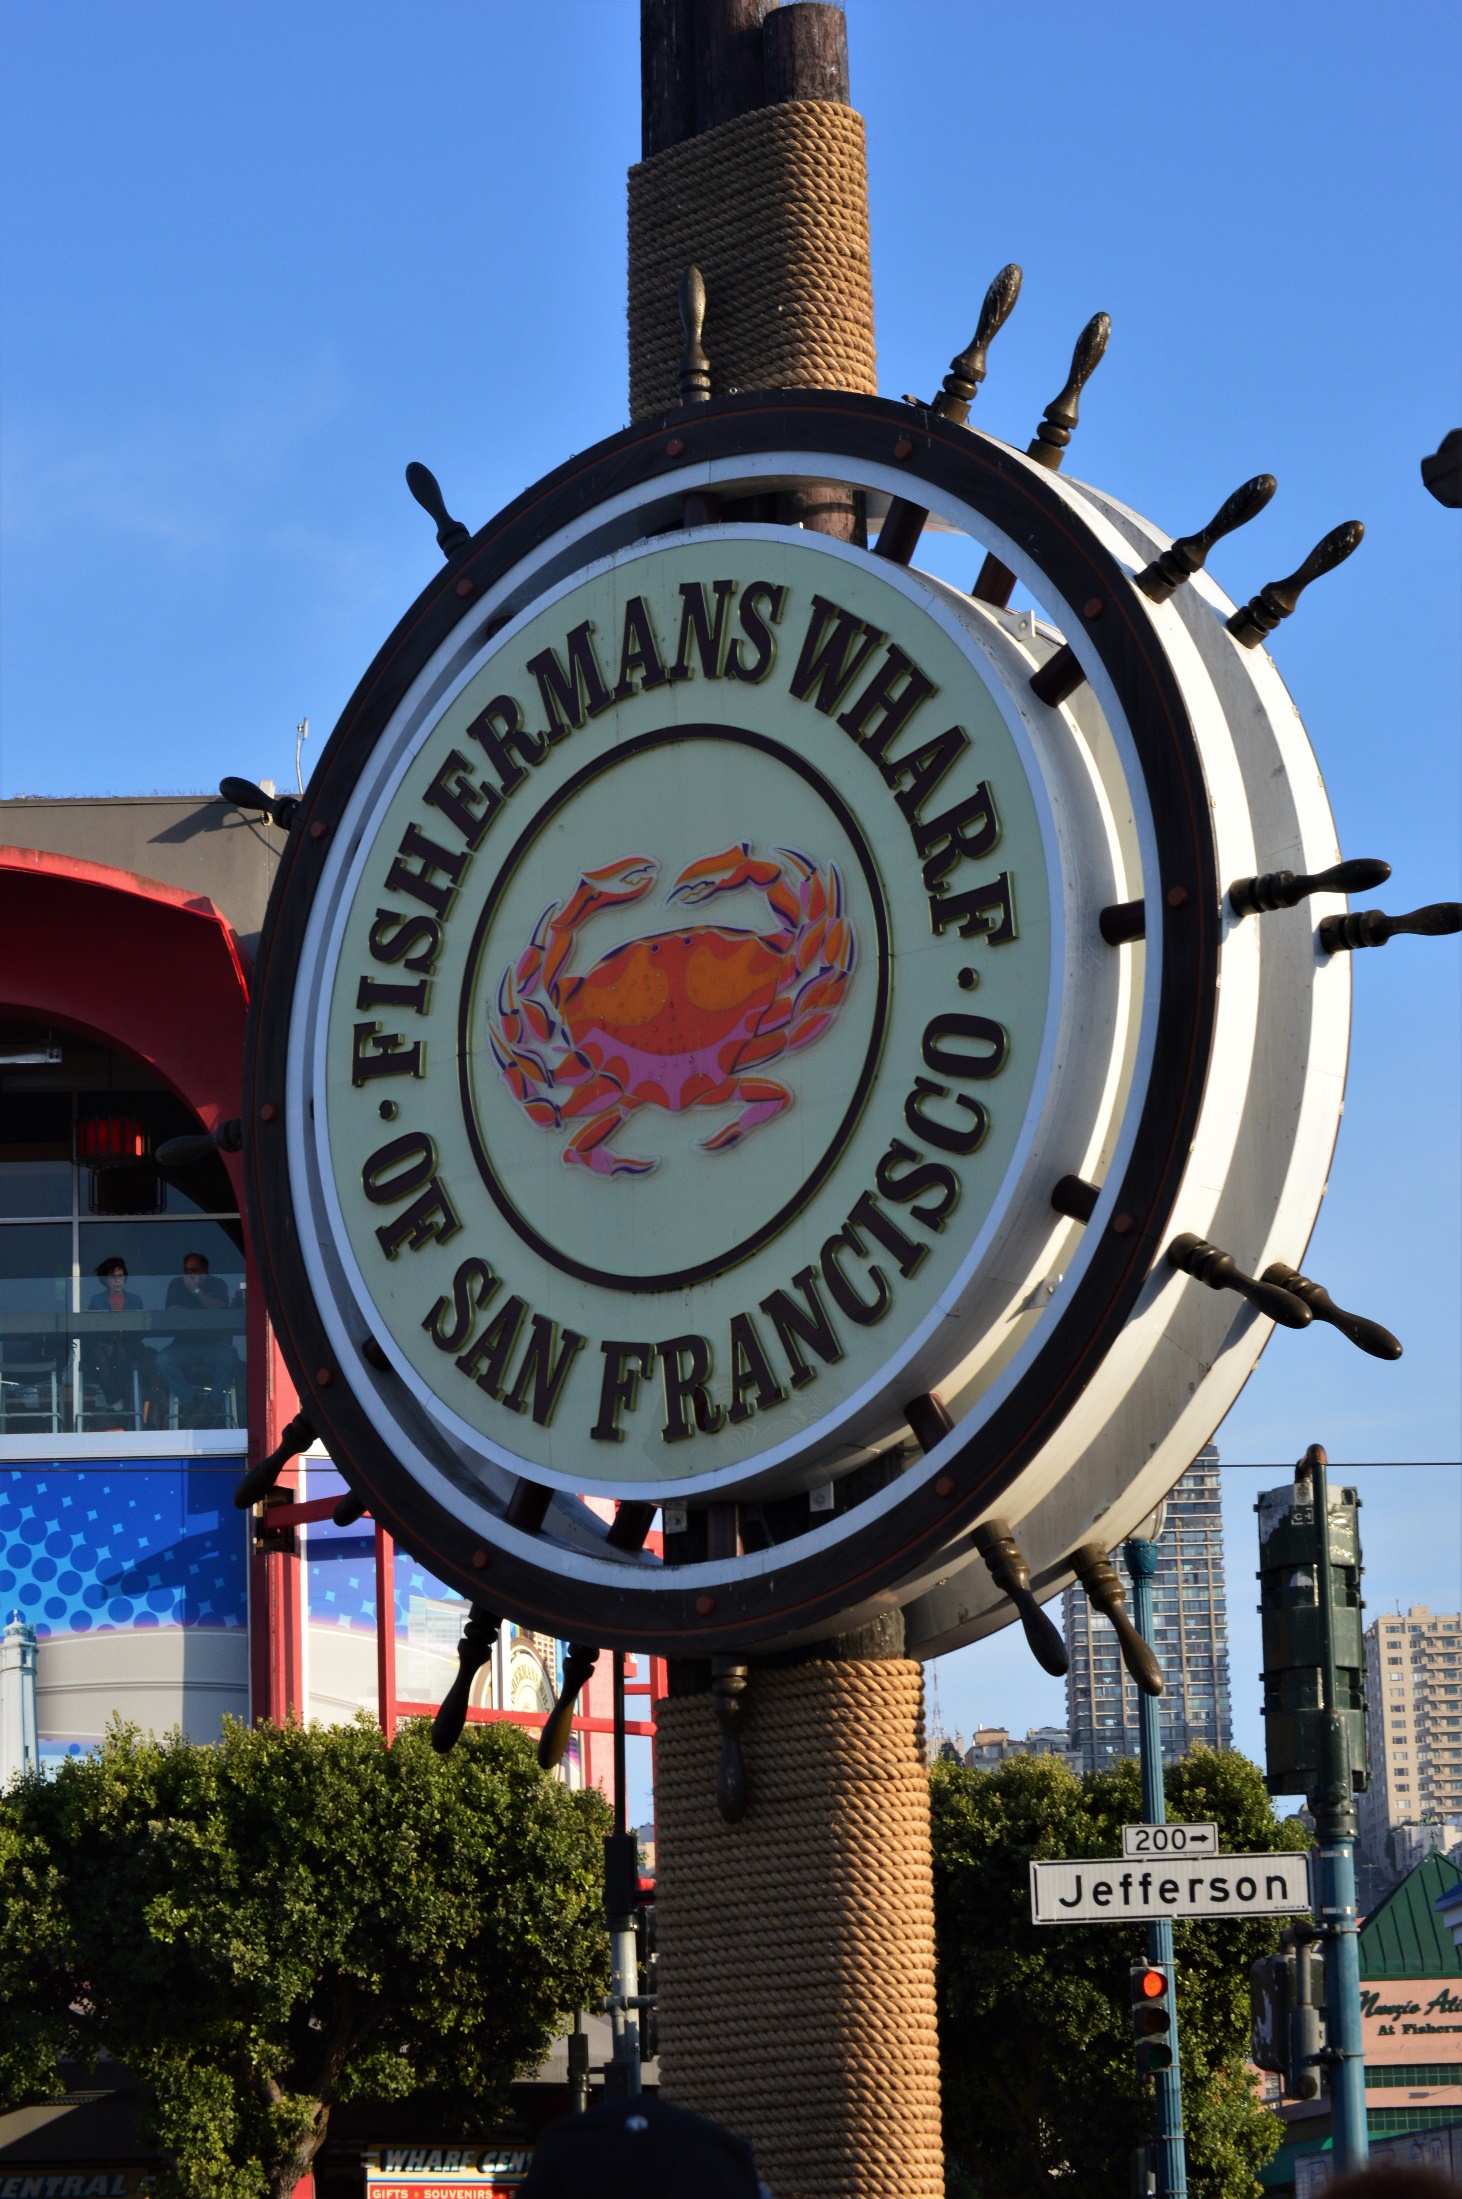 Sign for Fisherman's Wharf in San Francisco